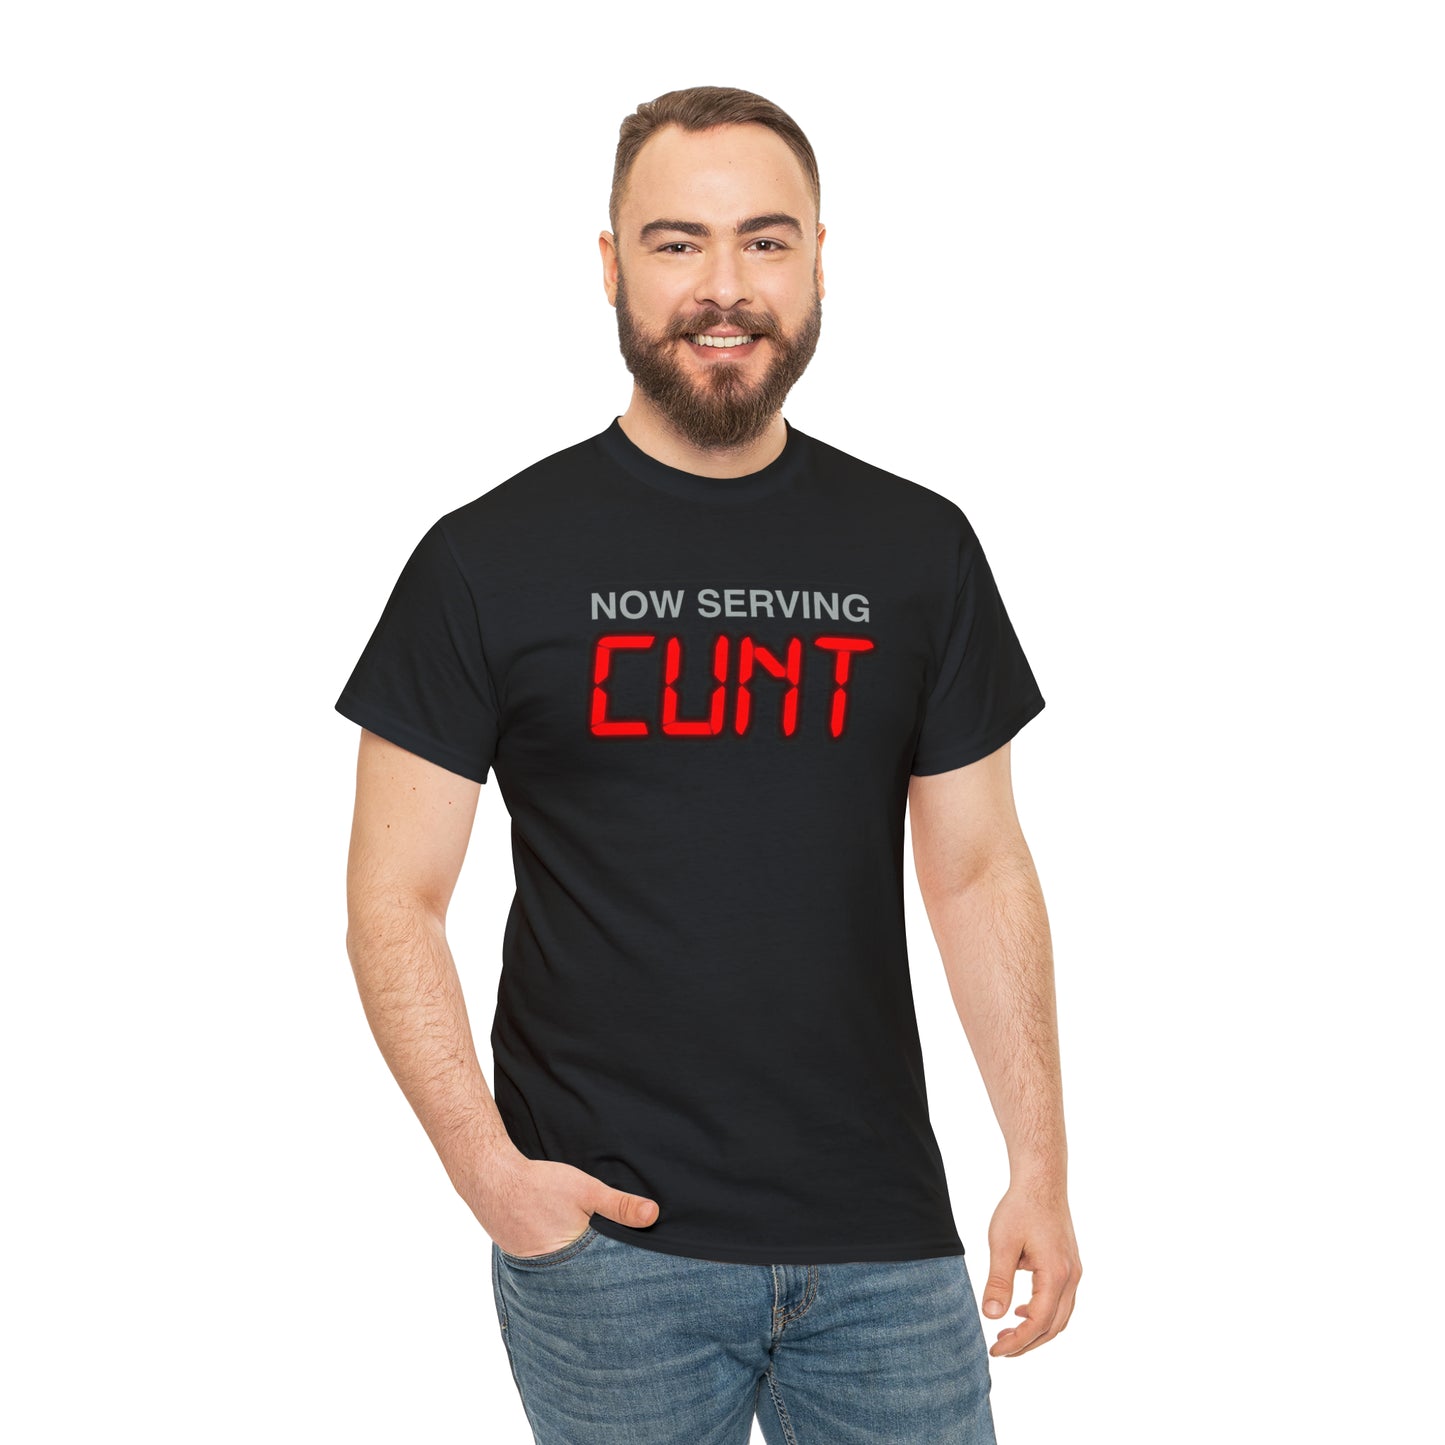 Now Serving Cunt.